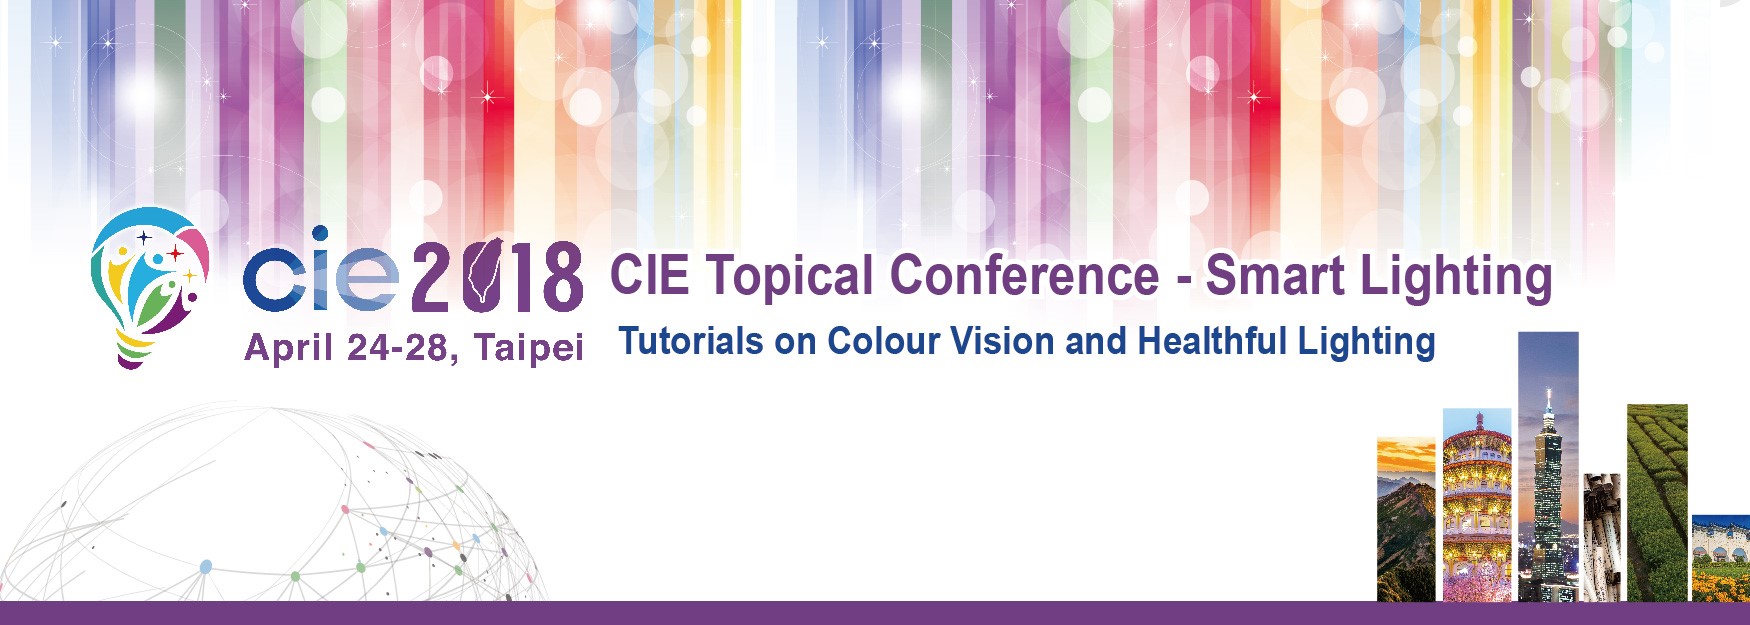 CIE 2018 Topical Conference